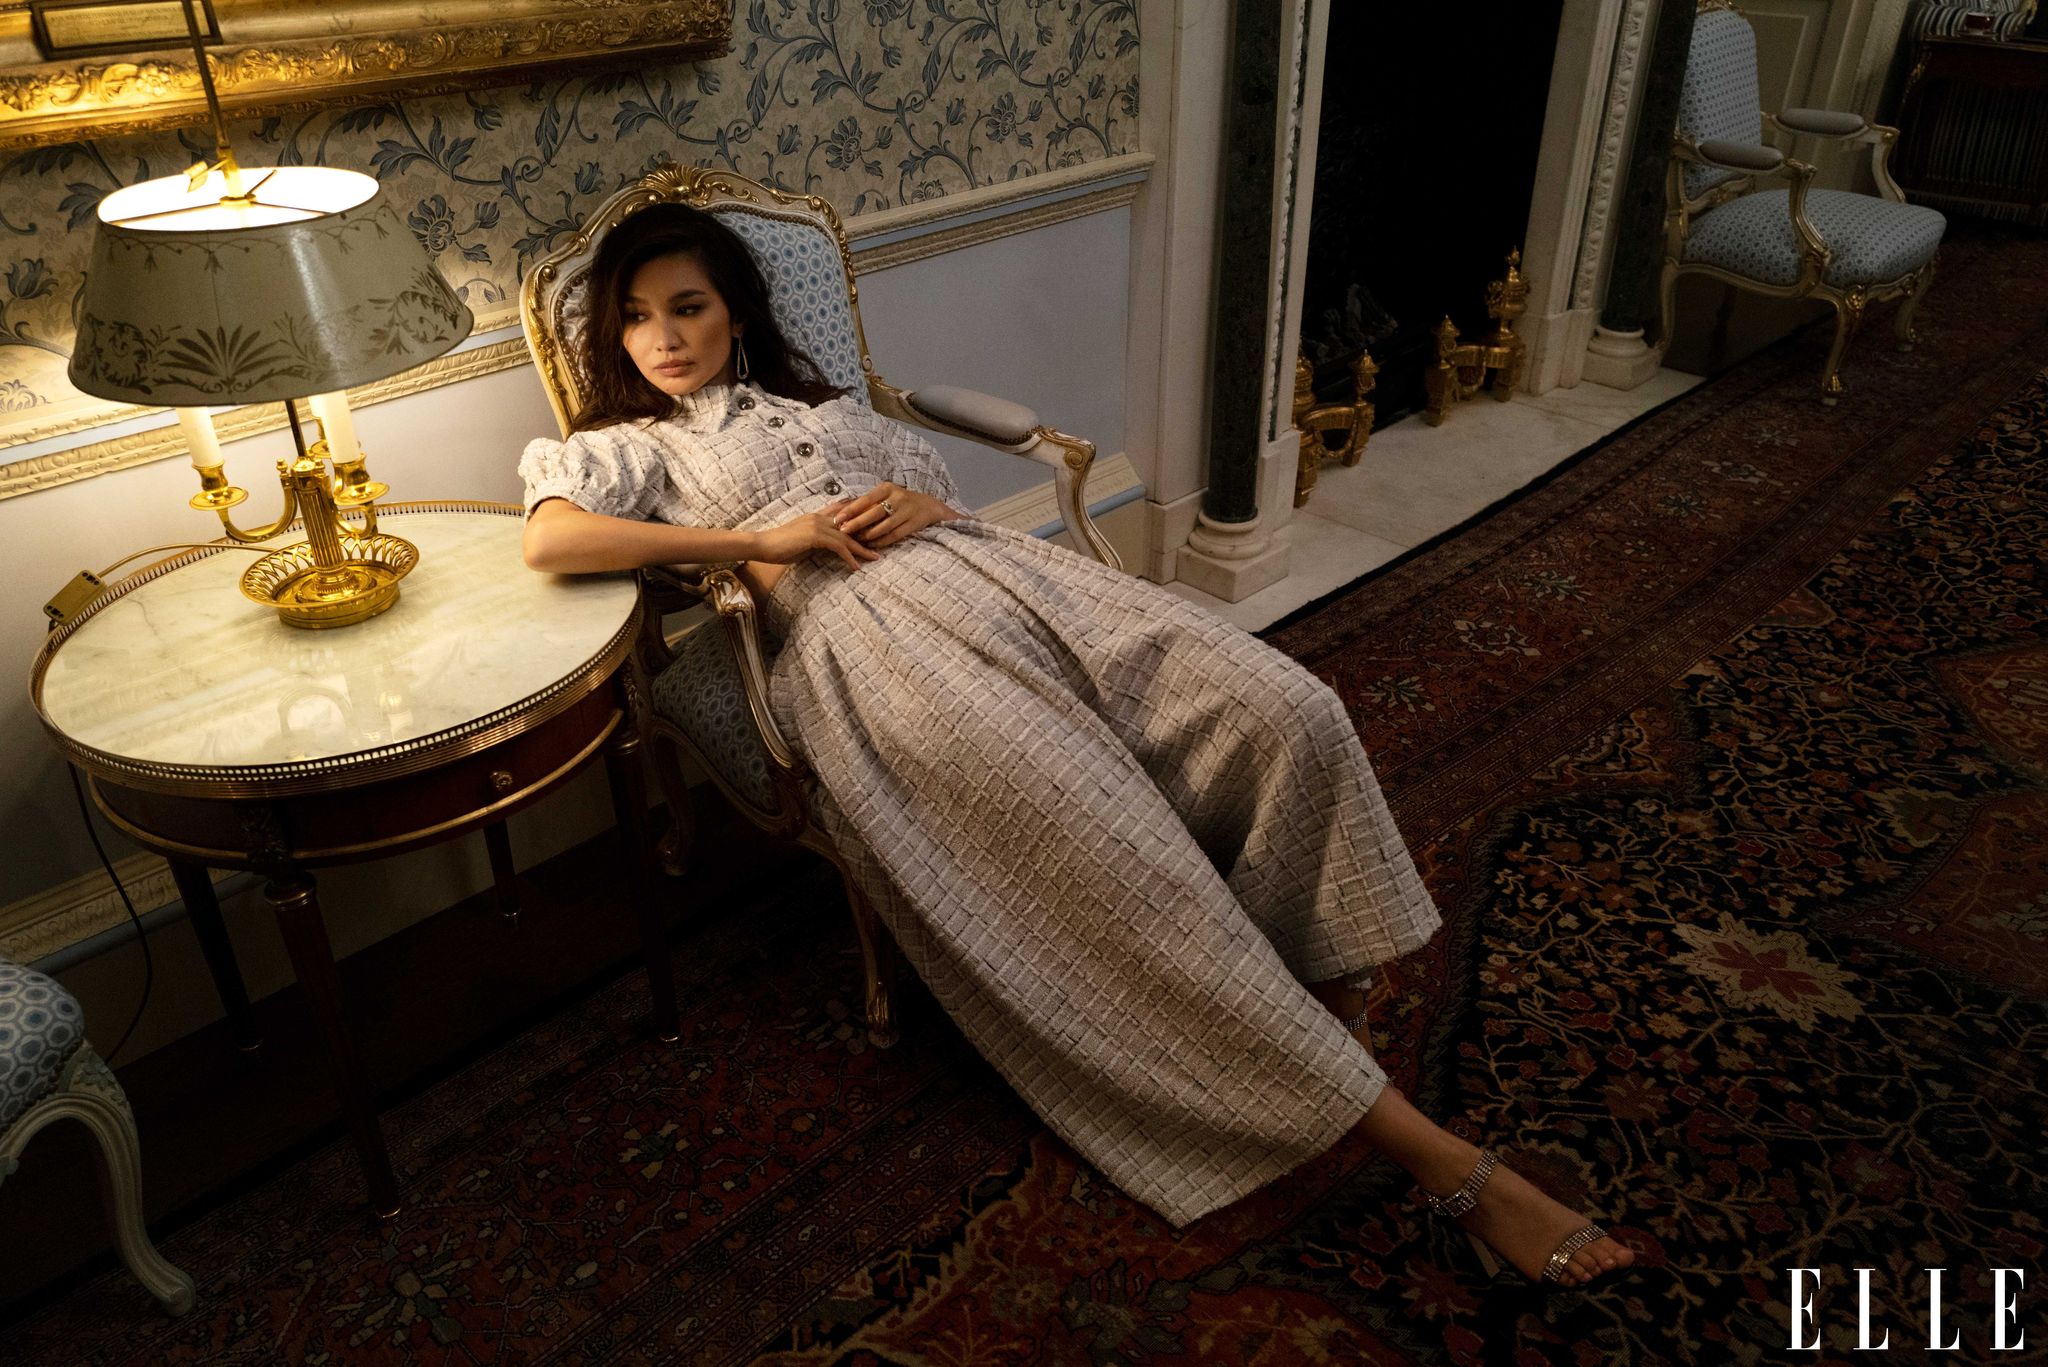 gemma chan slouches in an armchair in an ornate hallway